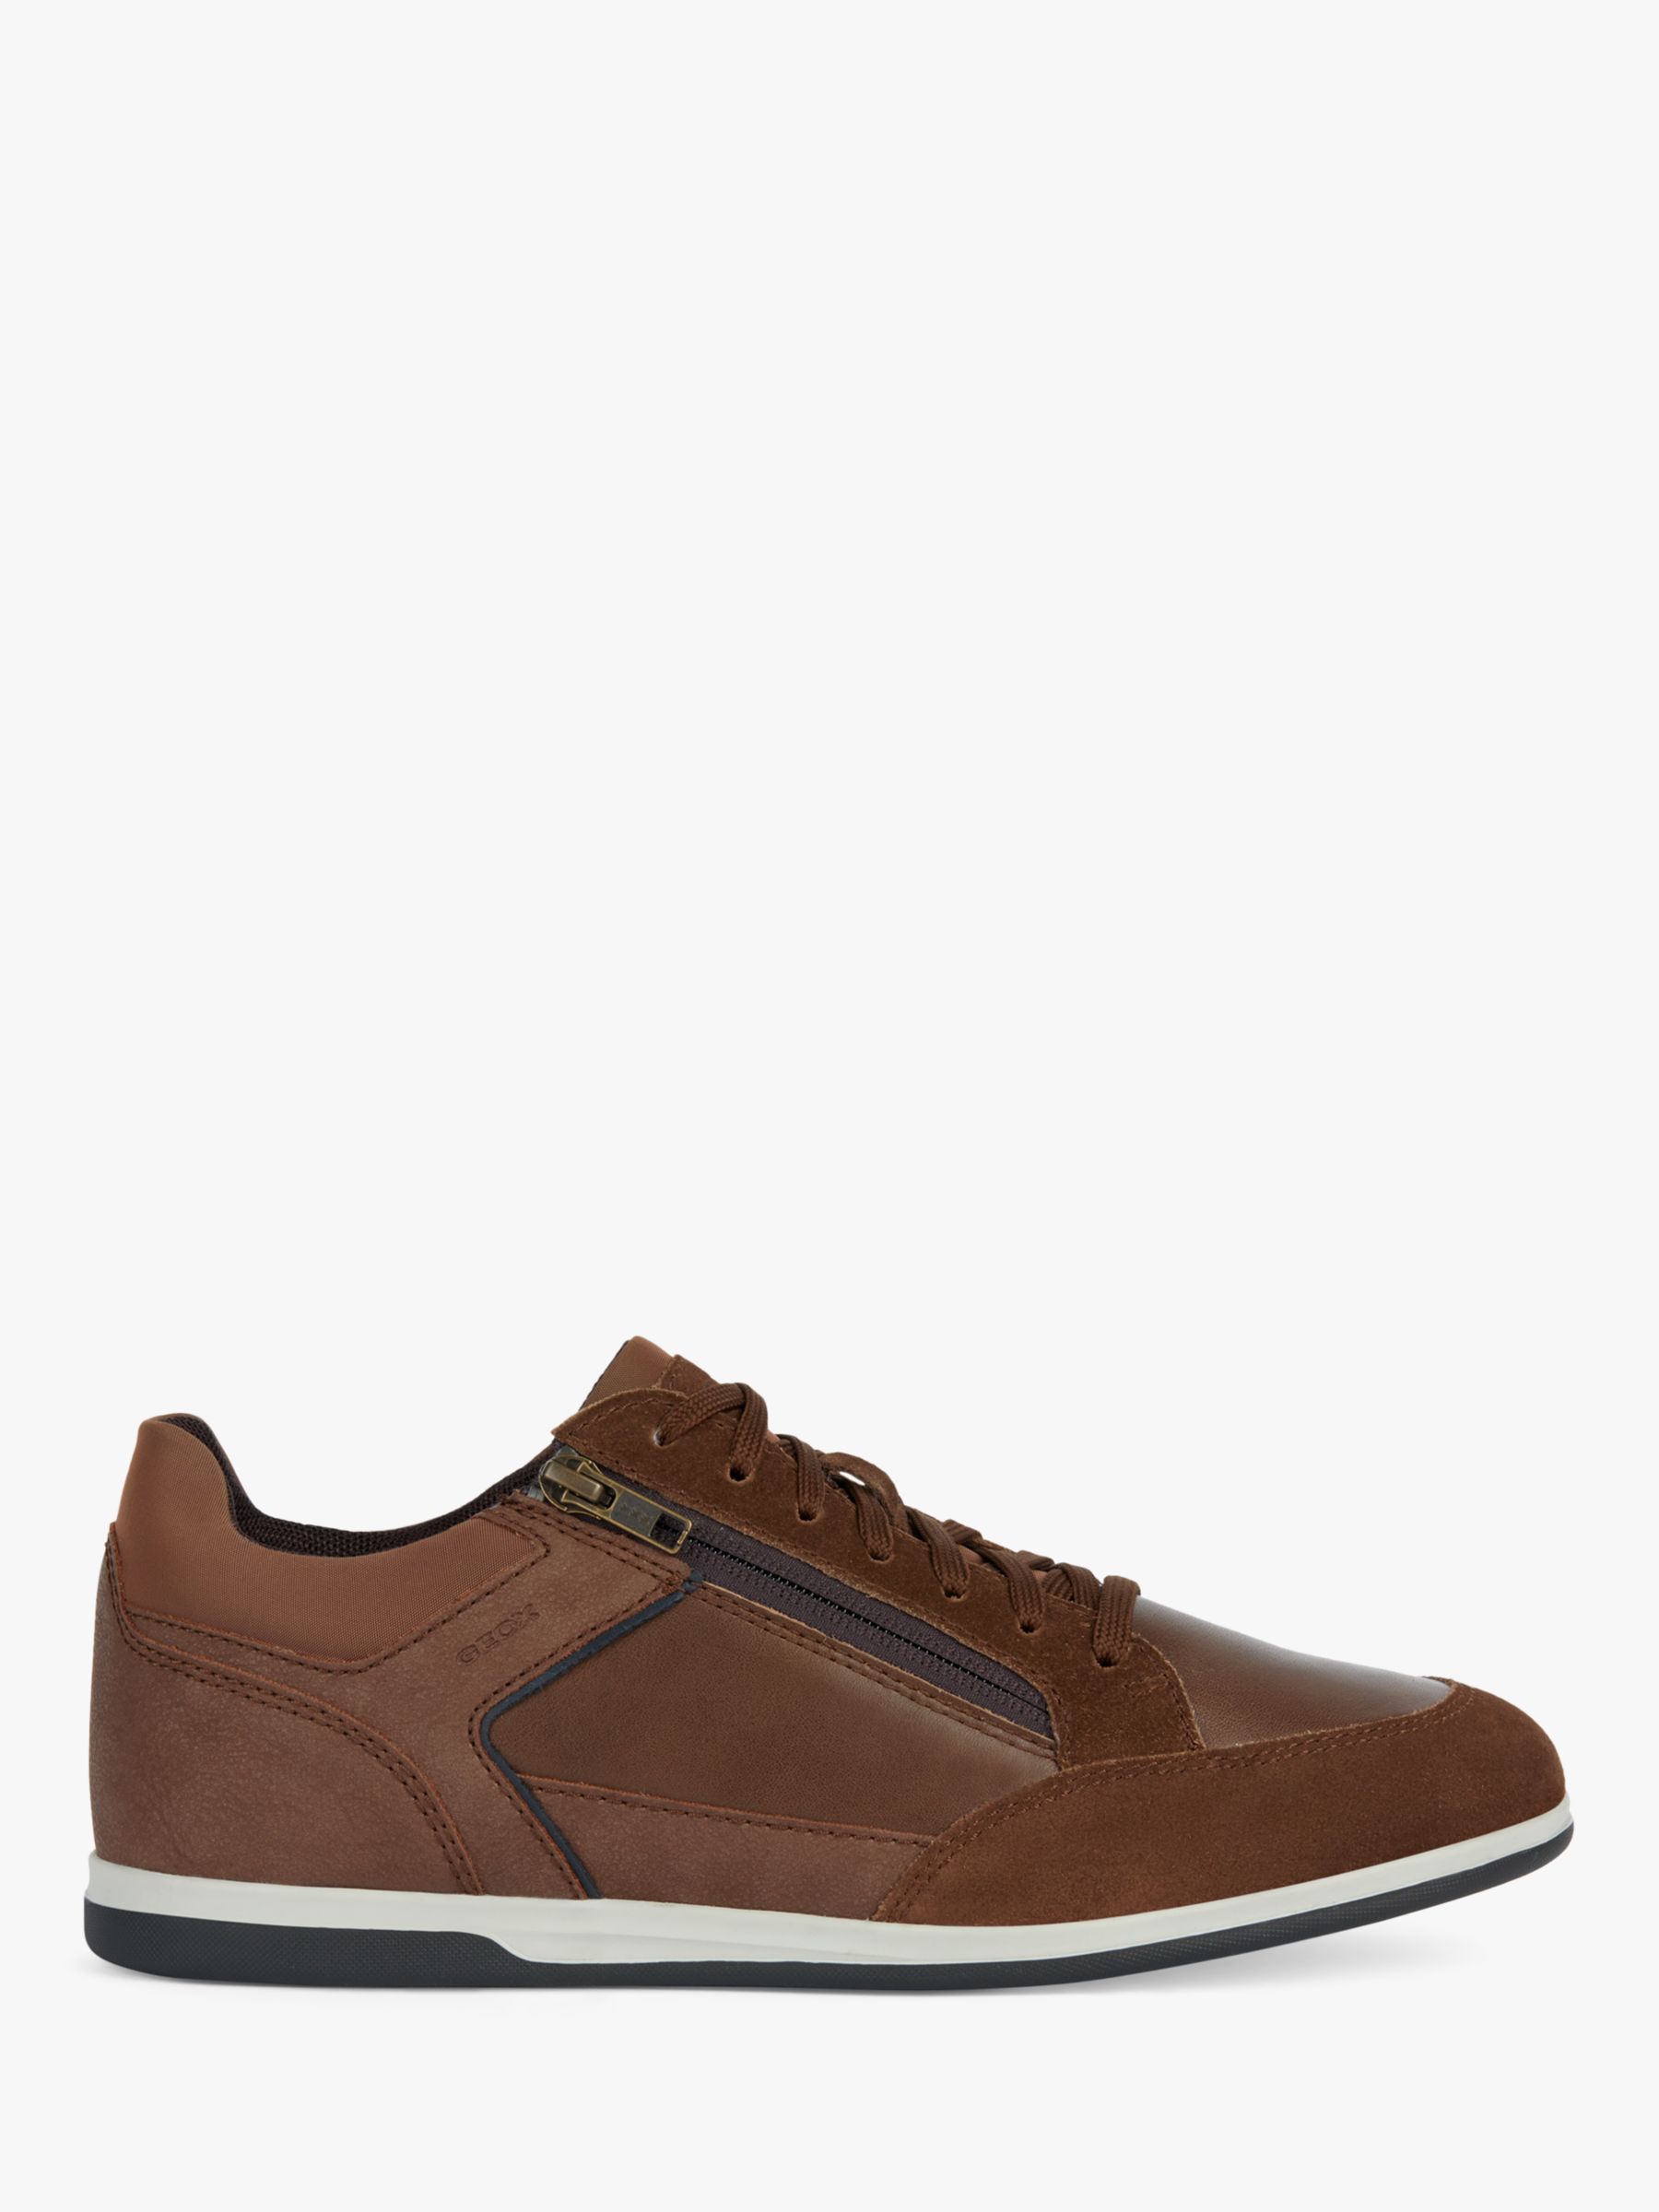 Geox Renan Wide Fit Leather Slip On Trainers, Brown Cotto at John Lewis ...